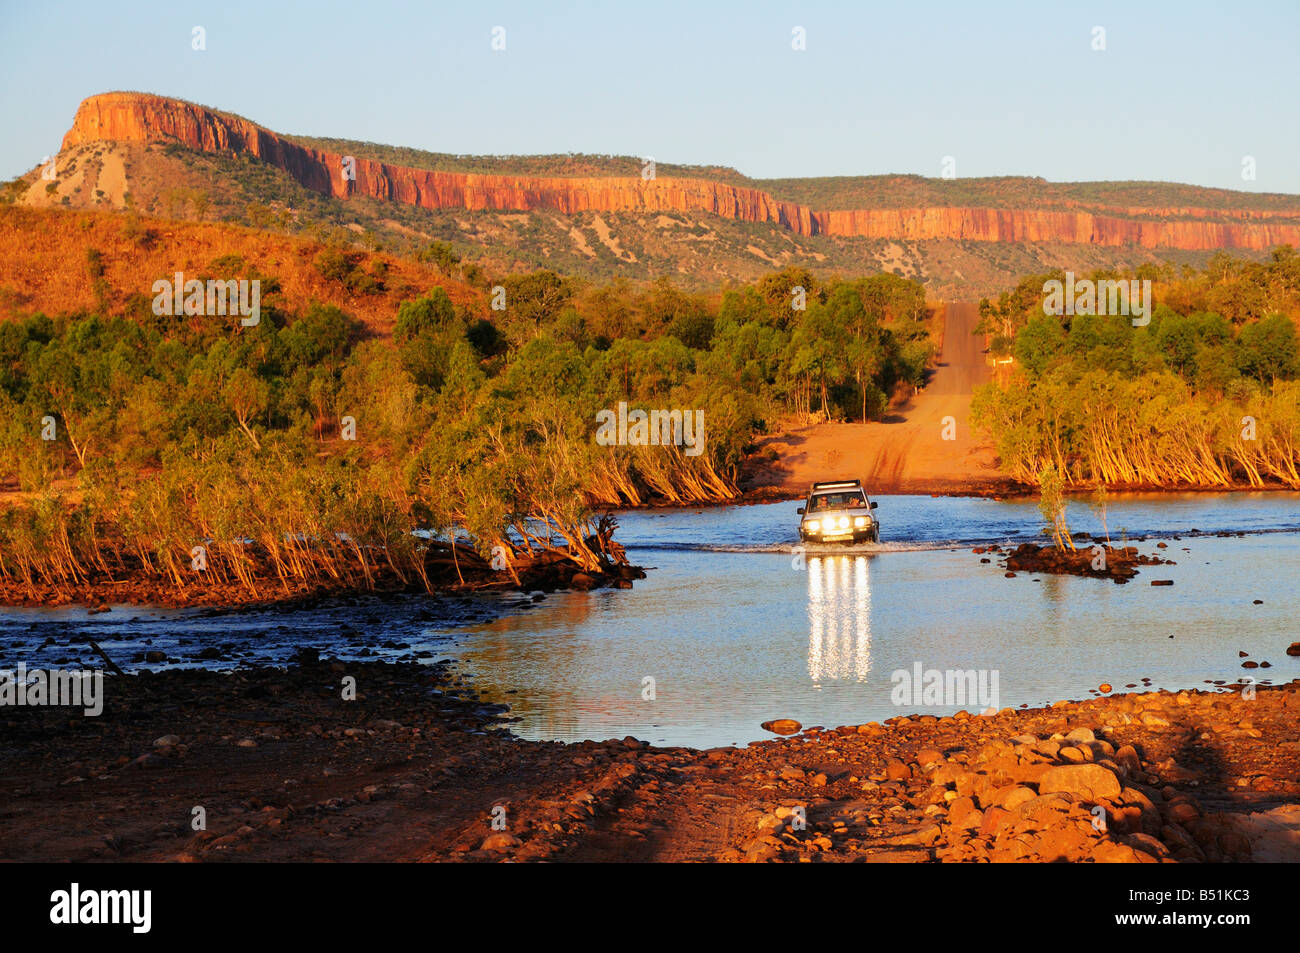 Vehicle Crossing Pentecost River with Cockburn Ranges in Background, Gibb River Road, Kimberley, Western Australia Stock Photo